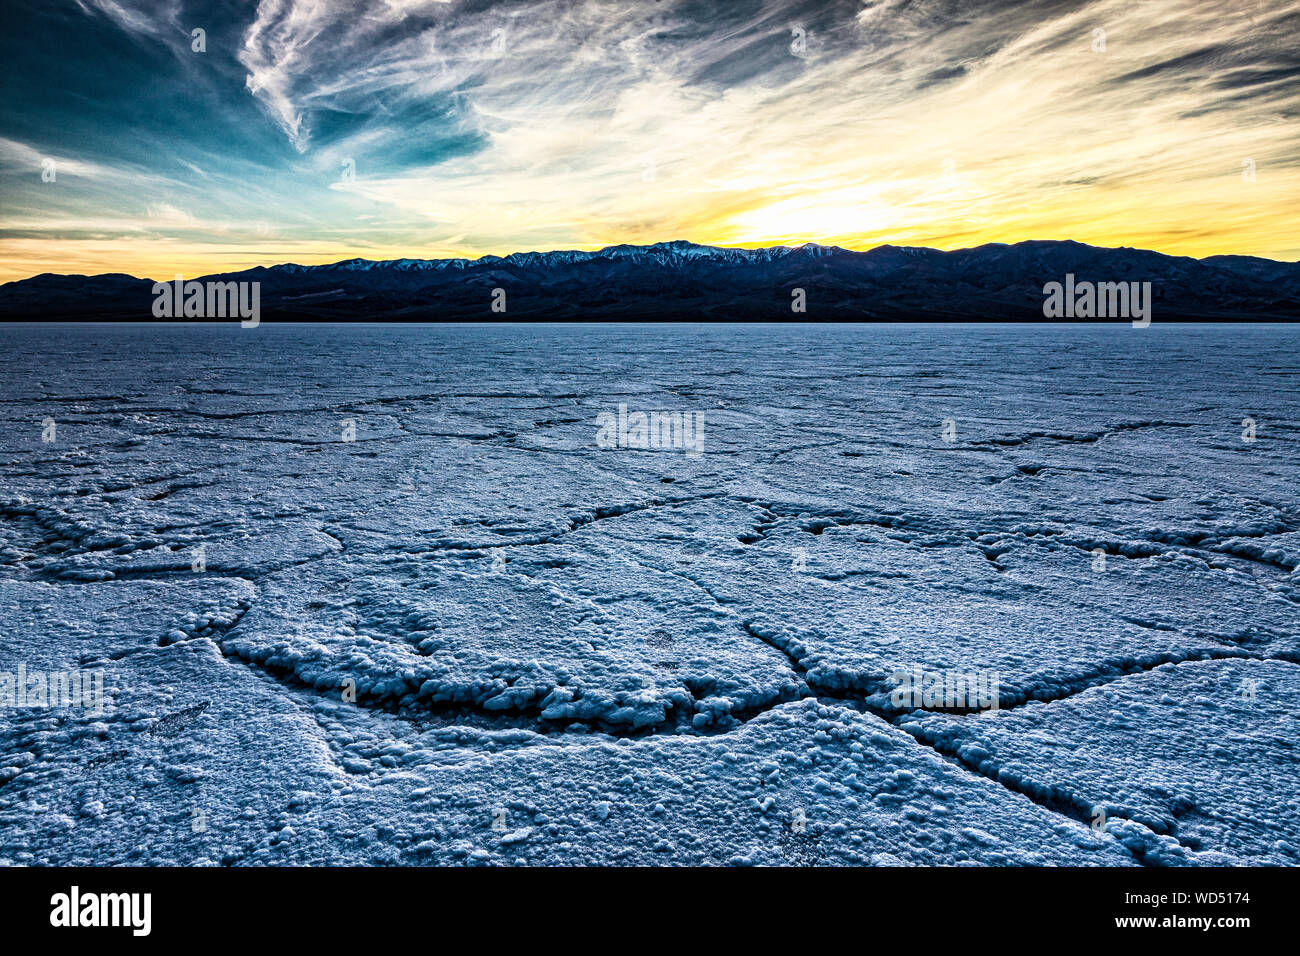 Sunset over the Panamint Mountains seen from Badwater salt flats in Death Valley, California. Stock Photo